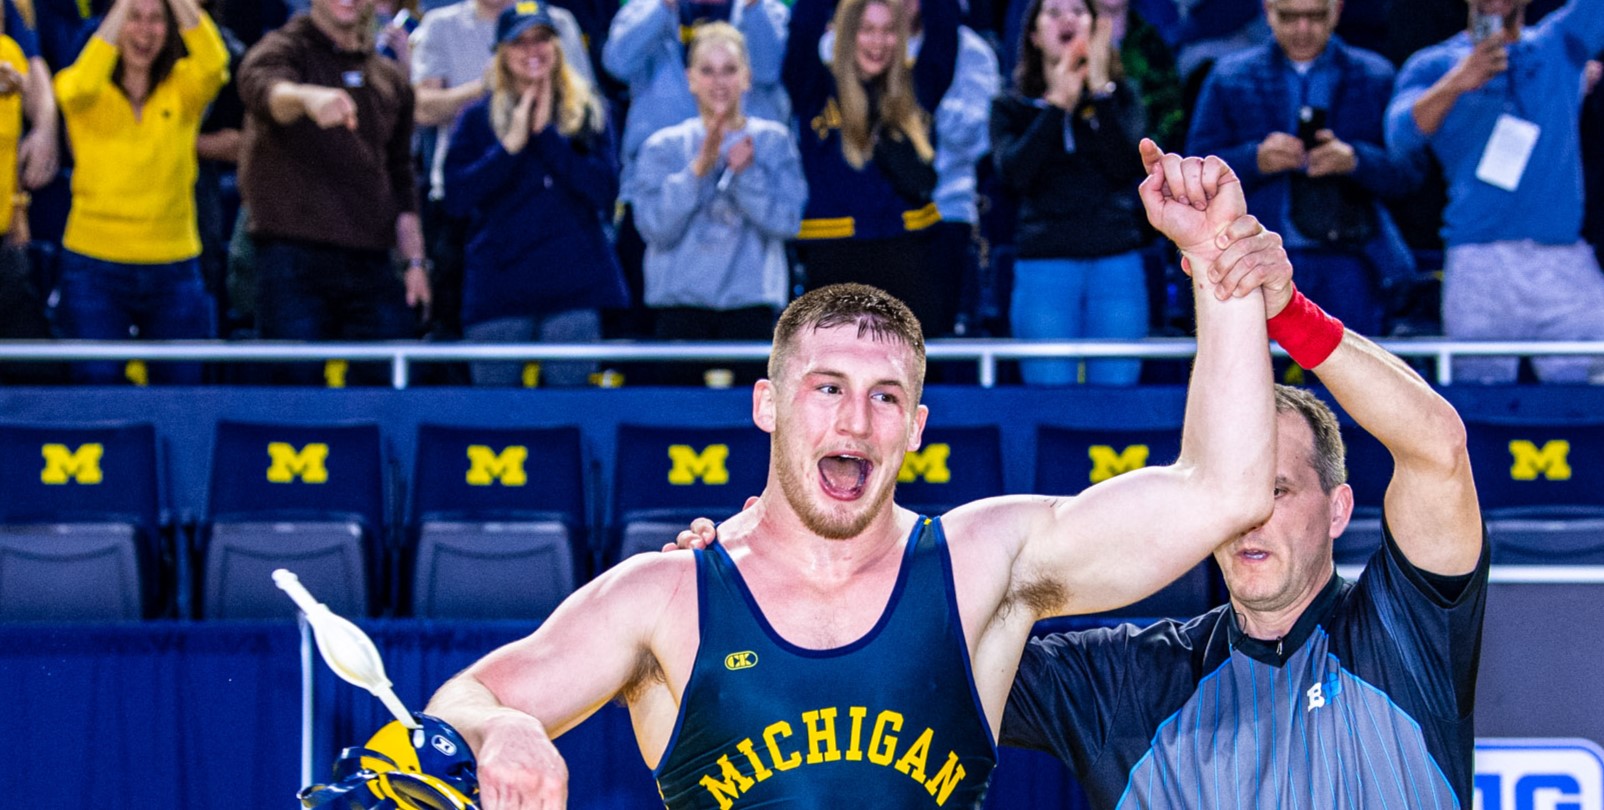 More information about "Parris claims first Big 10 title in last home match"